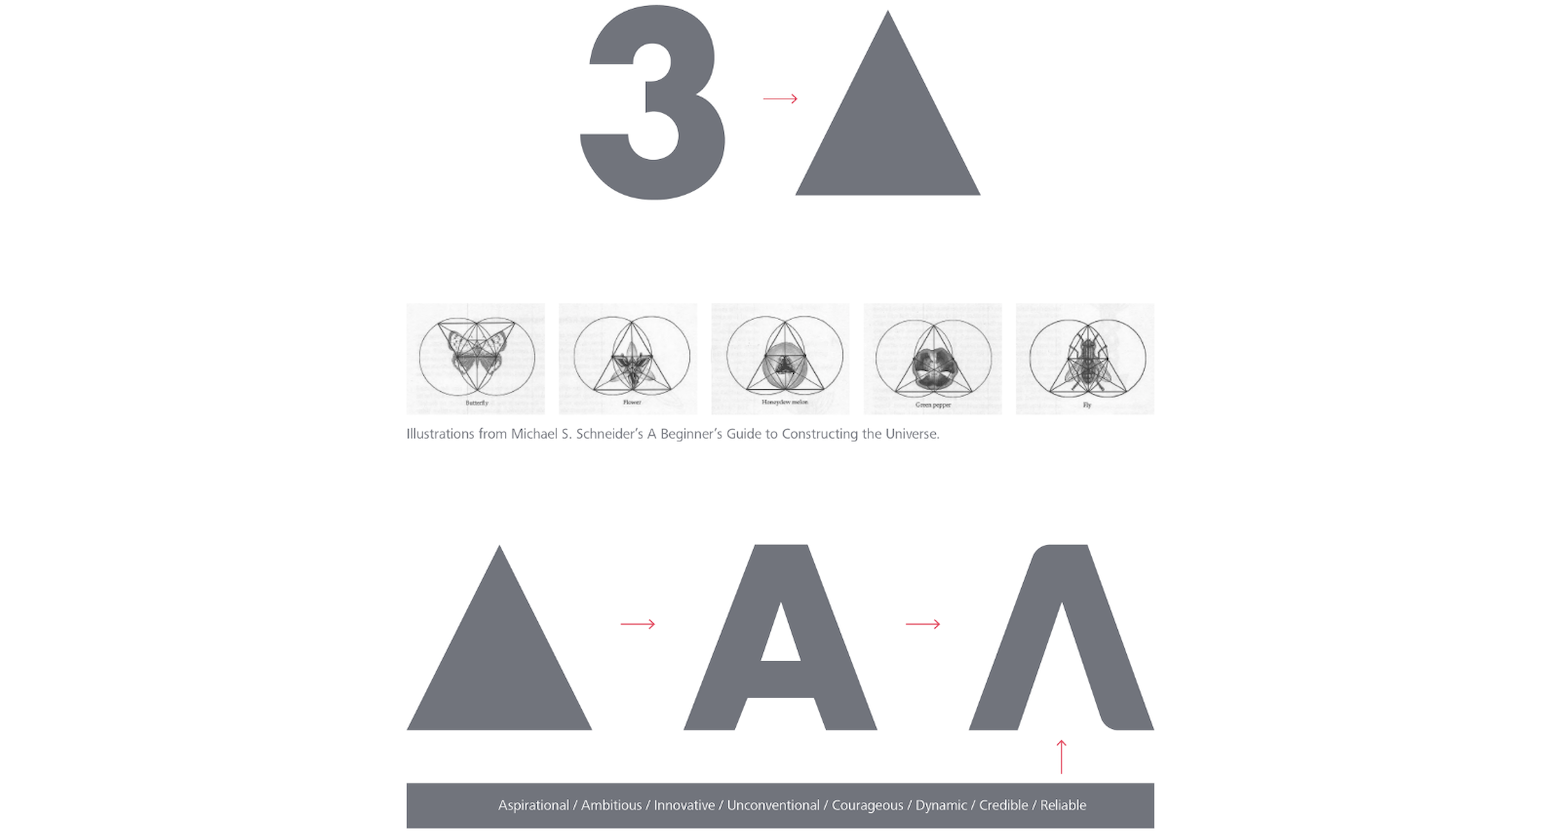 The journey of the number three to the final form of the “A” used in the IPAA logo with illustrations of triangular forms of nature,  a triangle with an arrow at its right that points to a typical letter A, and another arrow that points the final triangular A that is used in the logo.